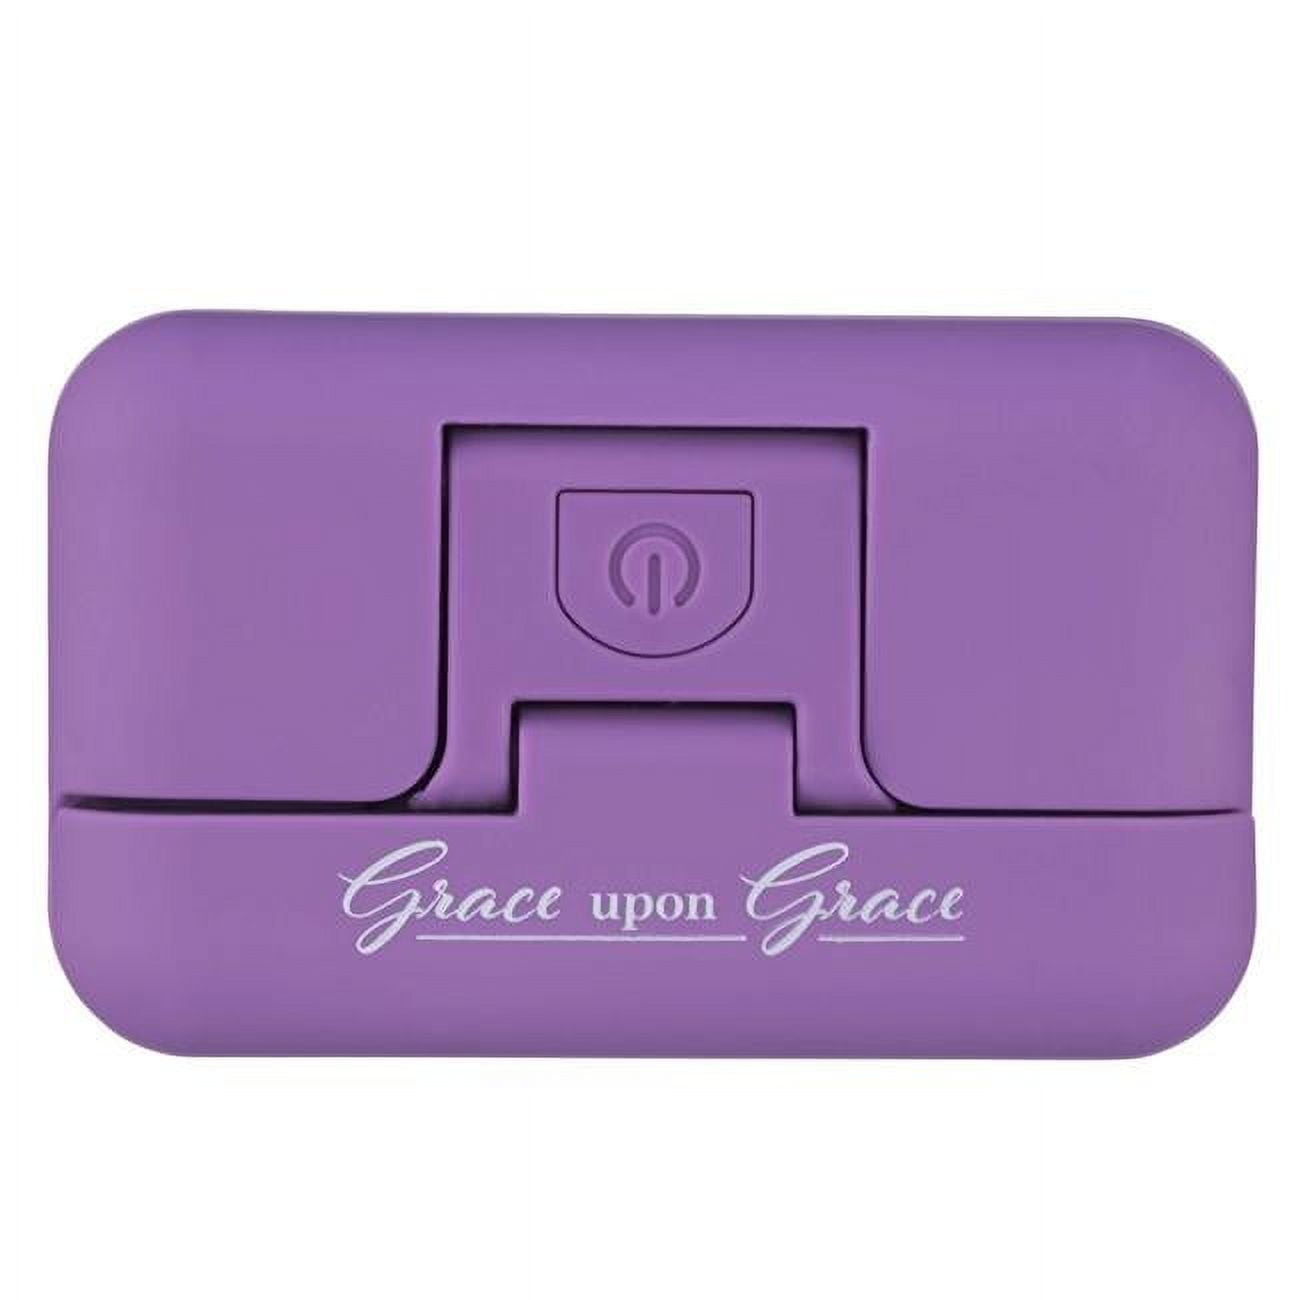 Picture of Christian Art Gifts 24616X Hydraulic Booklight - Grace Upon Grace, Purple